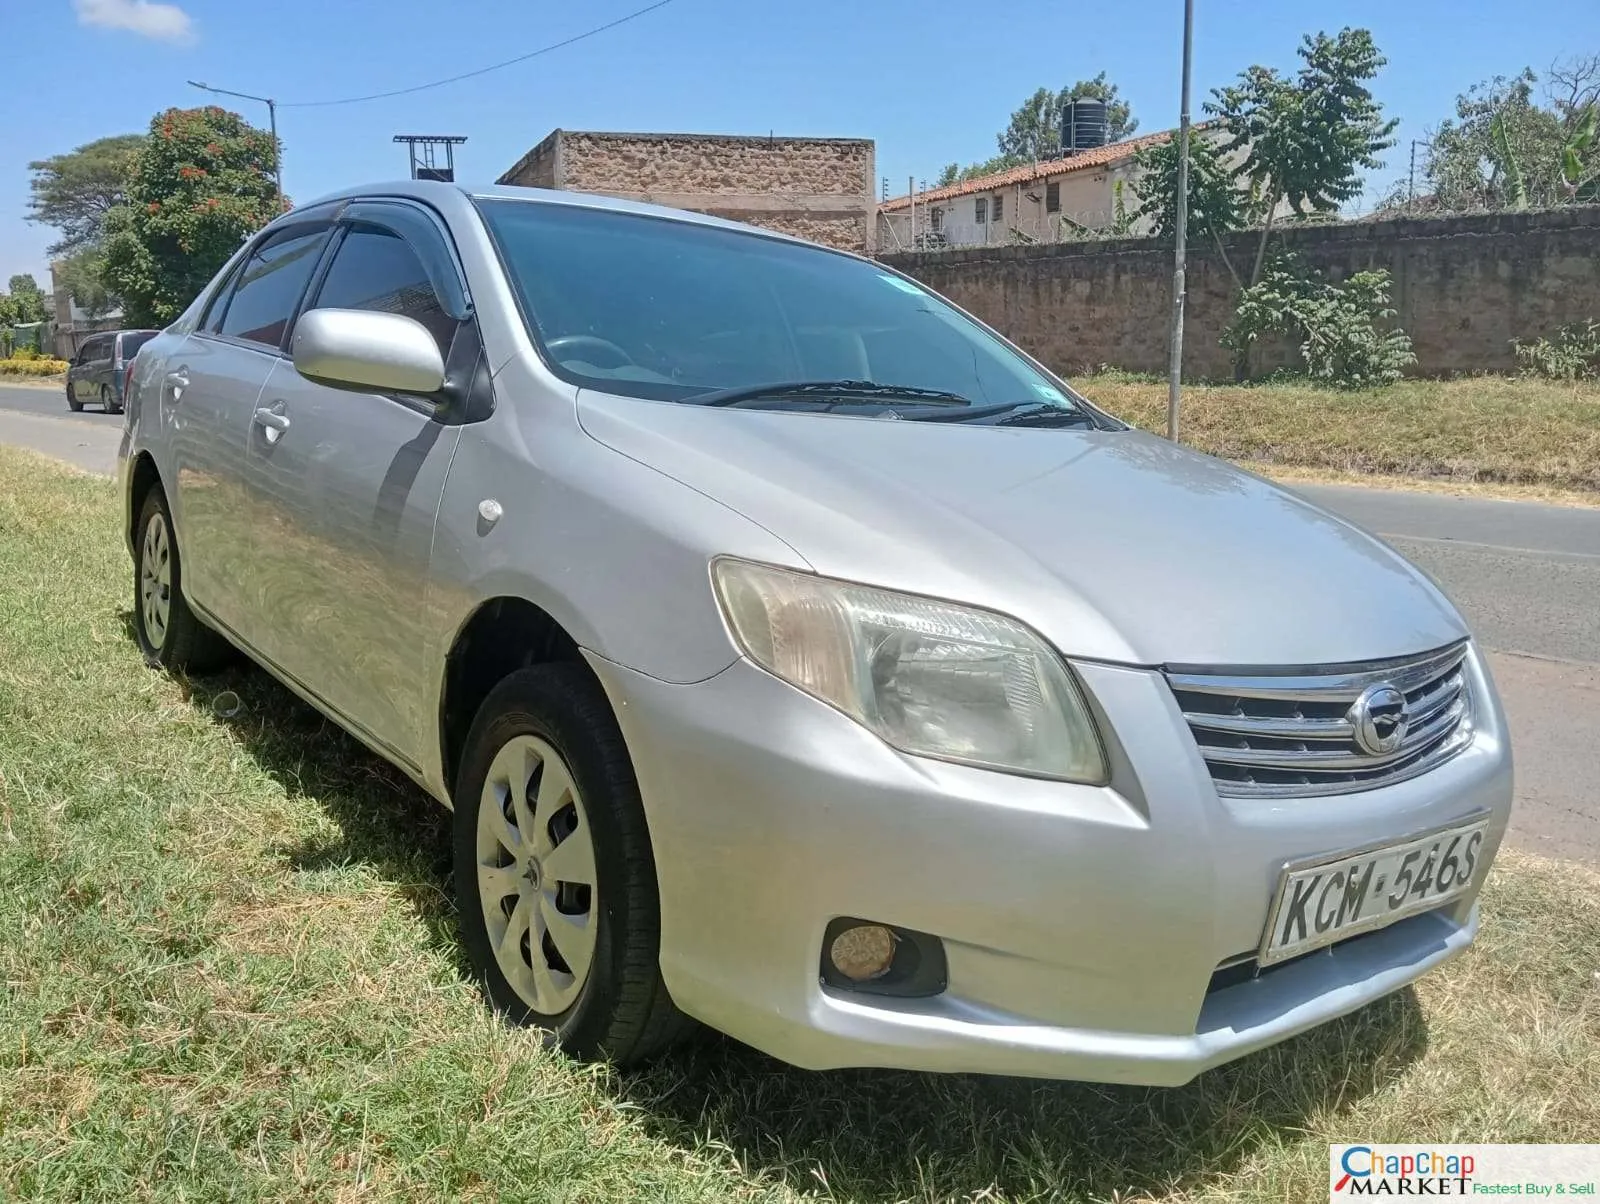 Toyota AXIO for sale in Kenya 🔥 CHEAPEST You pay 30% Deposit Trade in Ok EXCLUSIVE